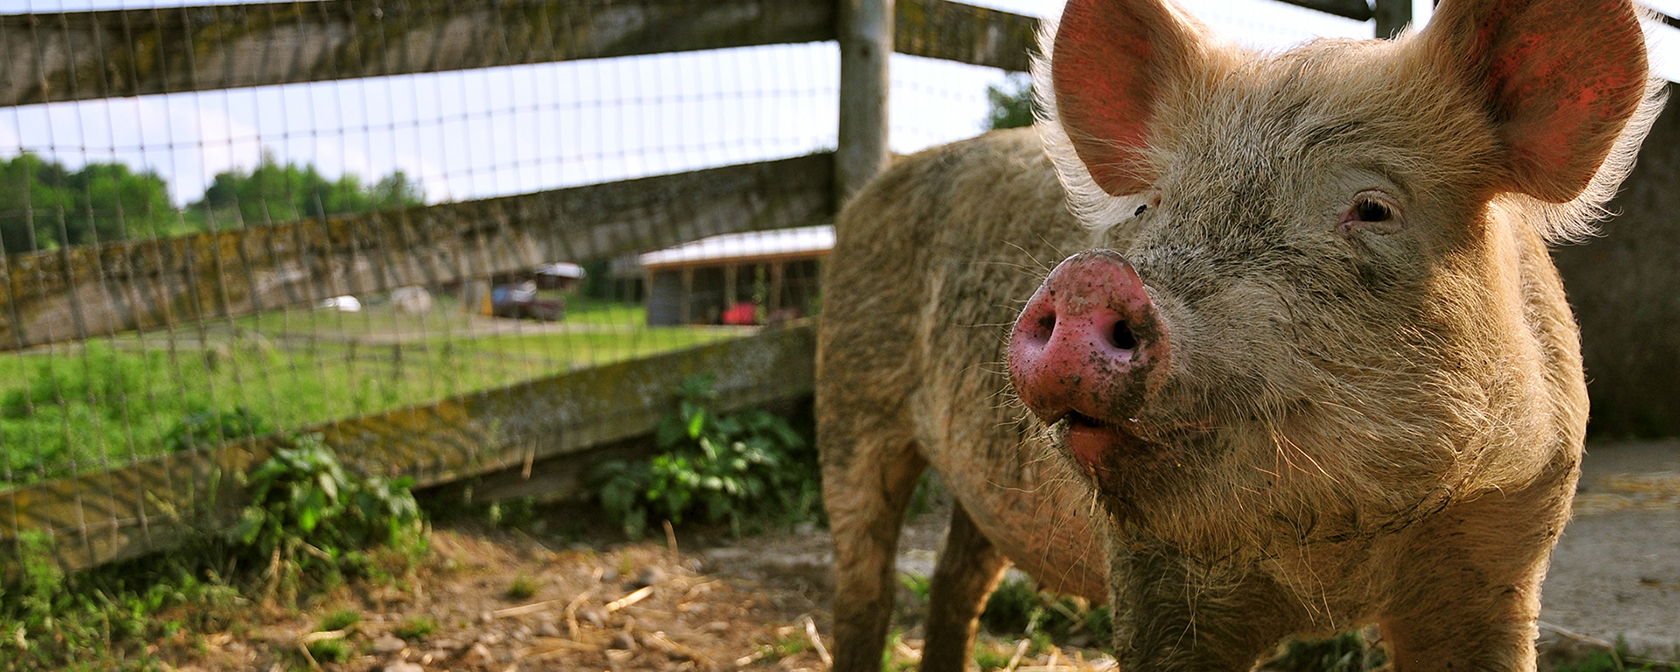 In significant win, court upholds Massachusetts farm animal protection law